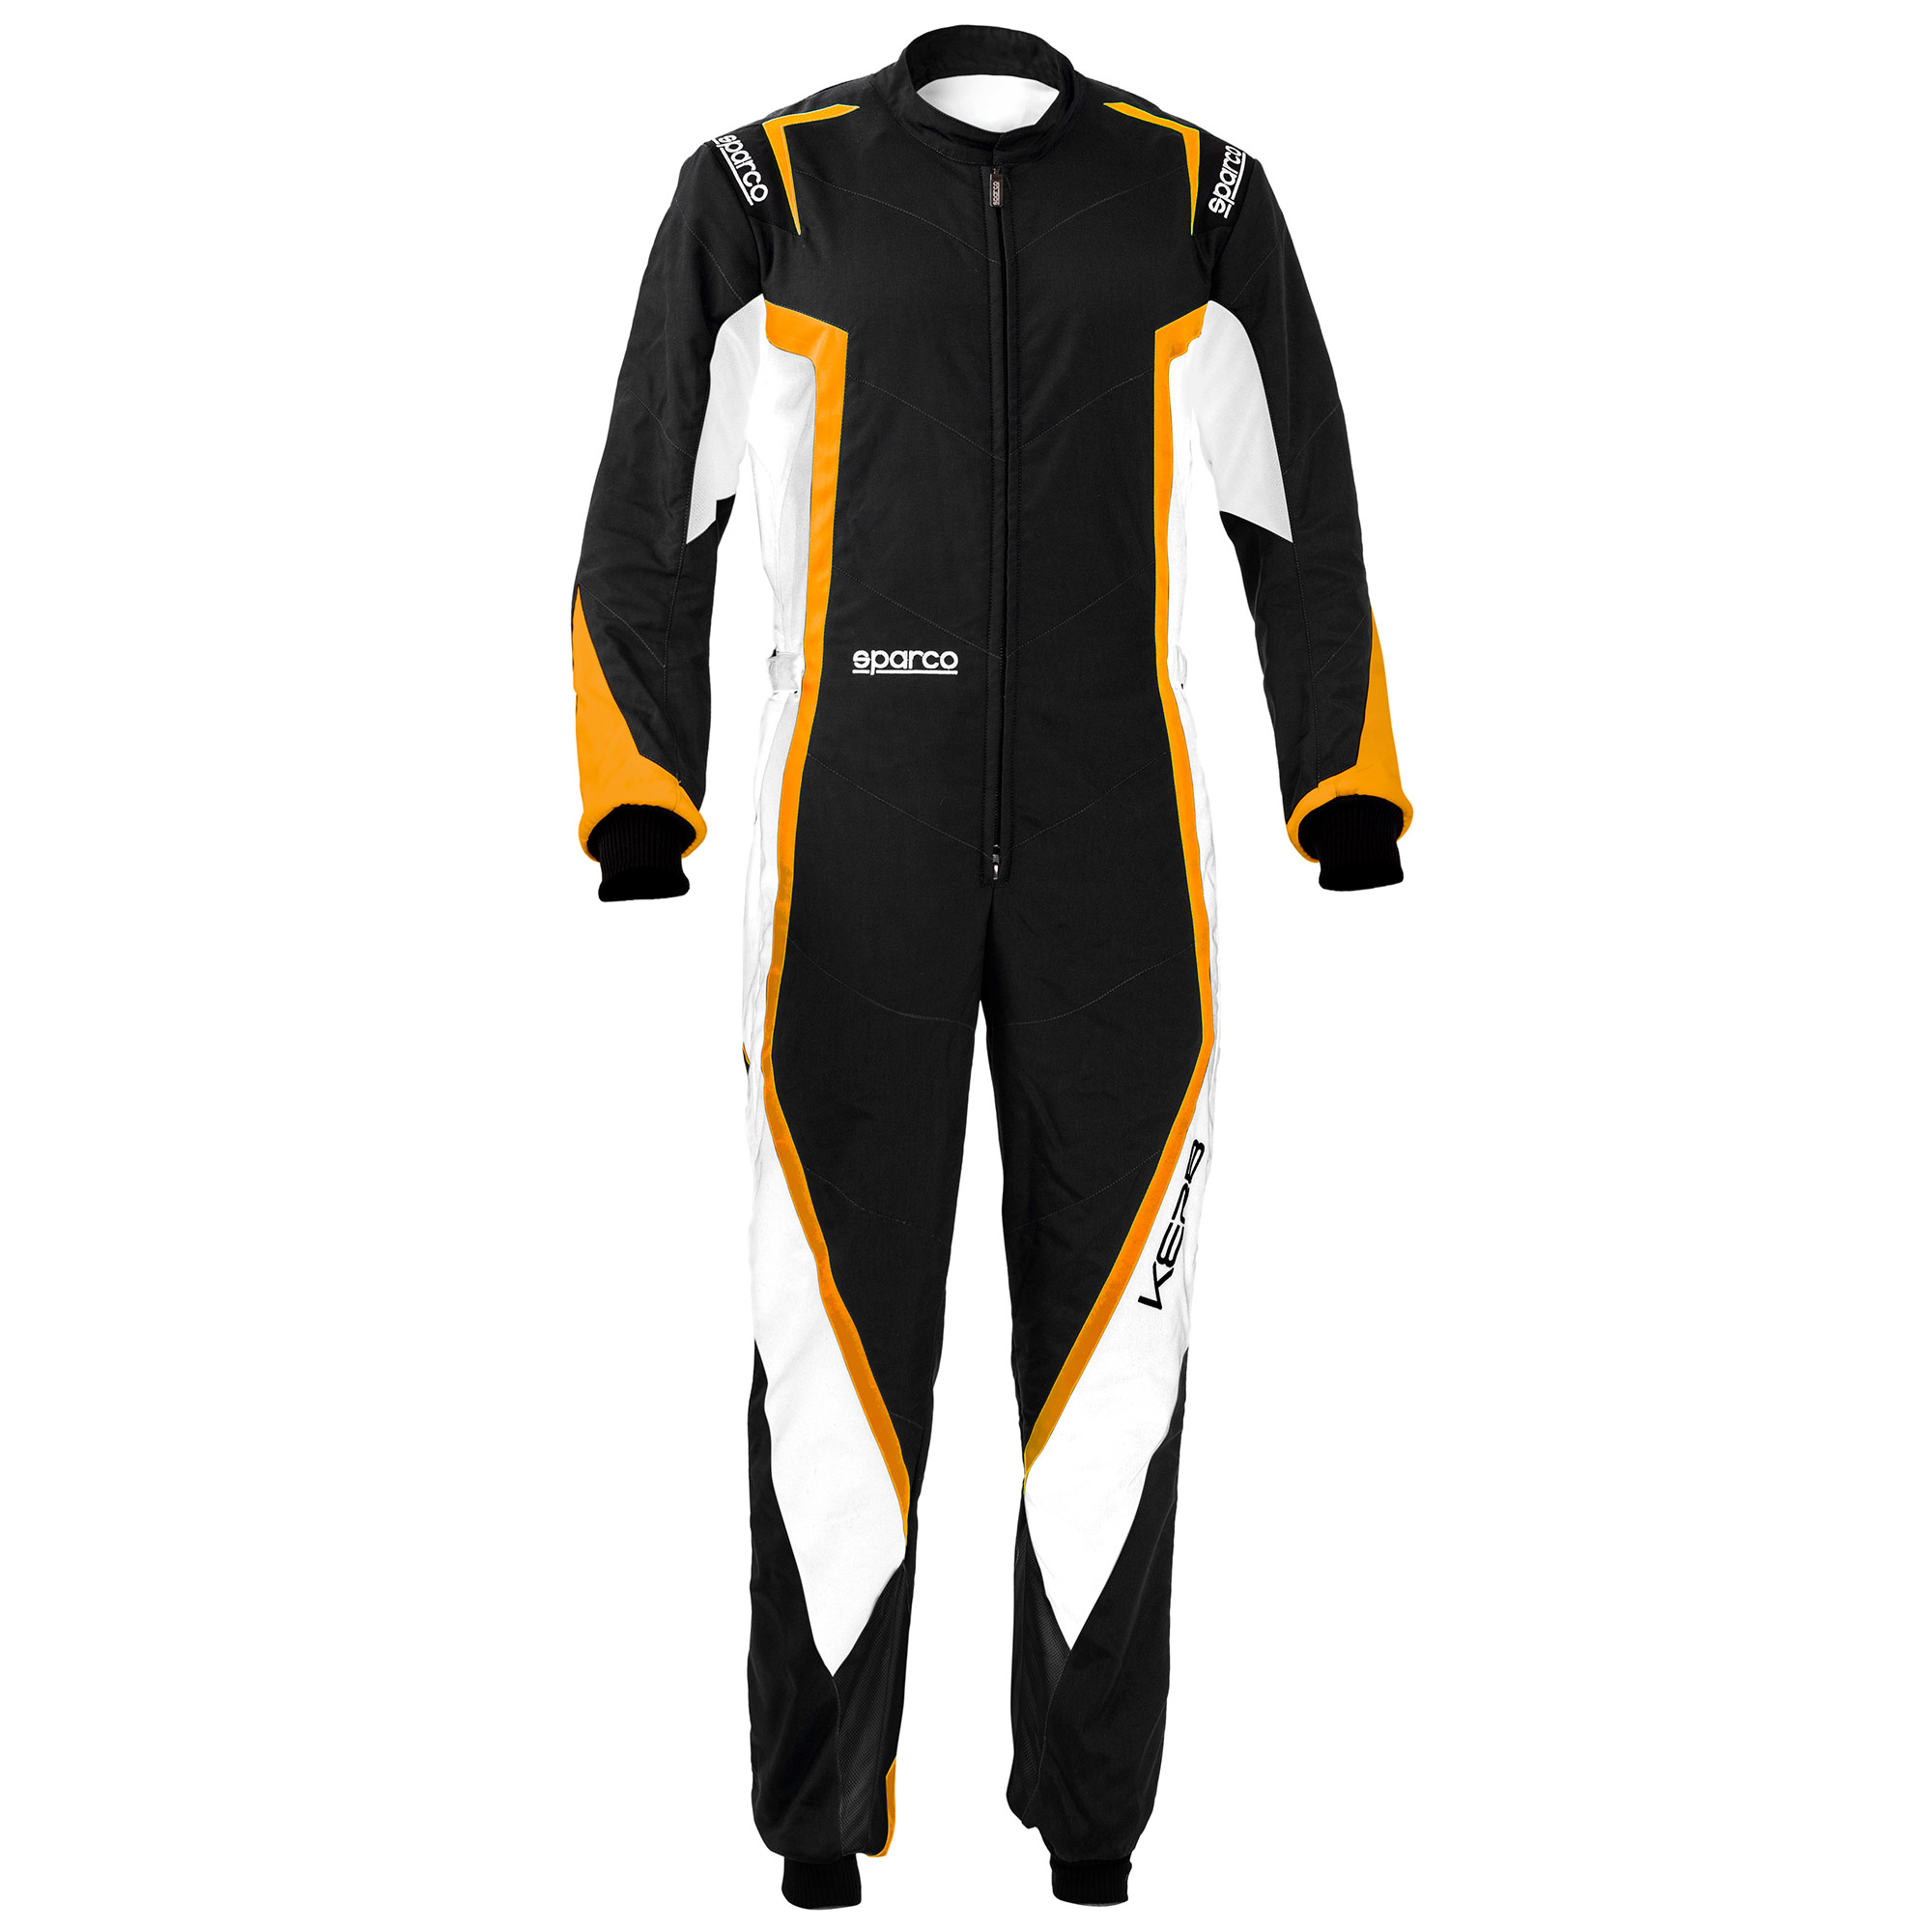 Go Kart Race Suit CIK FIA Level 2 Approved Shoes with free gift Gloves 